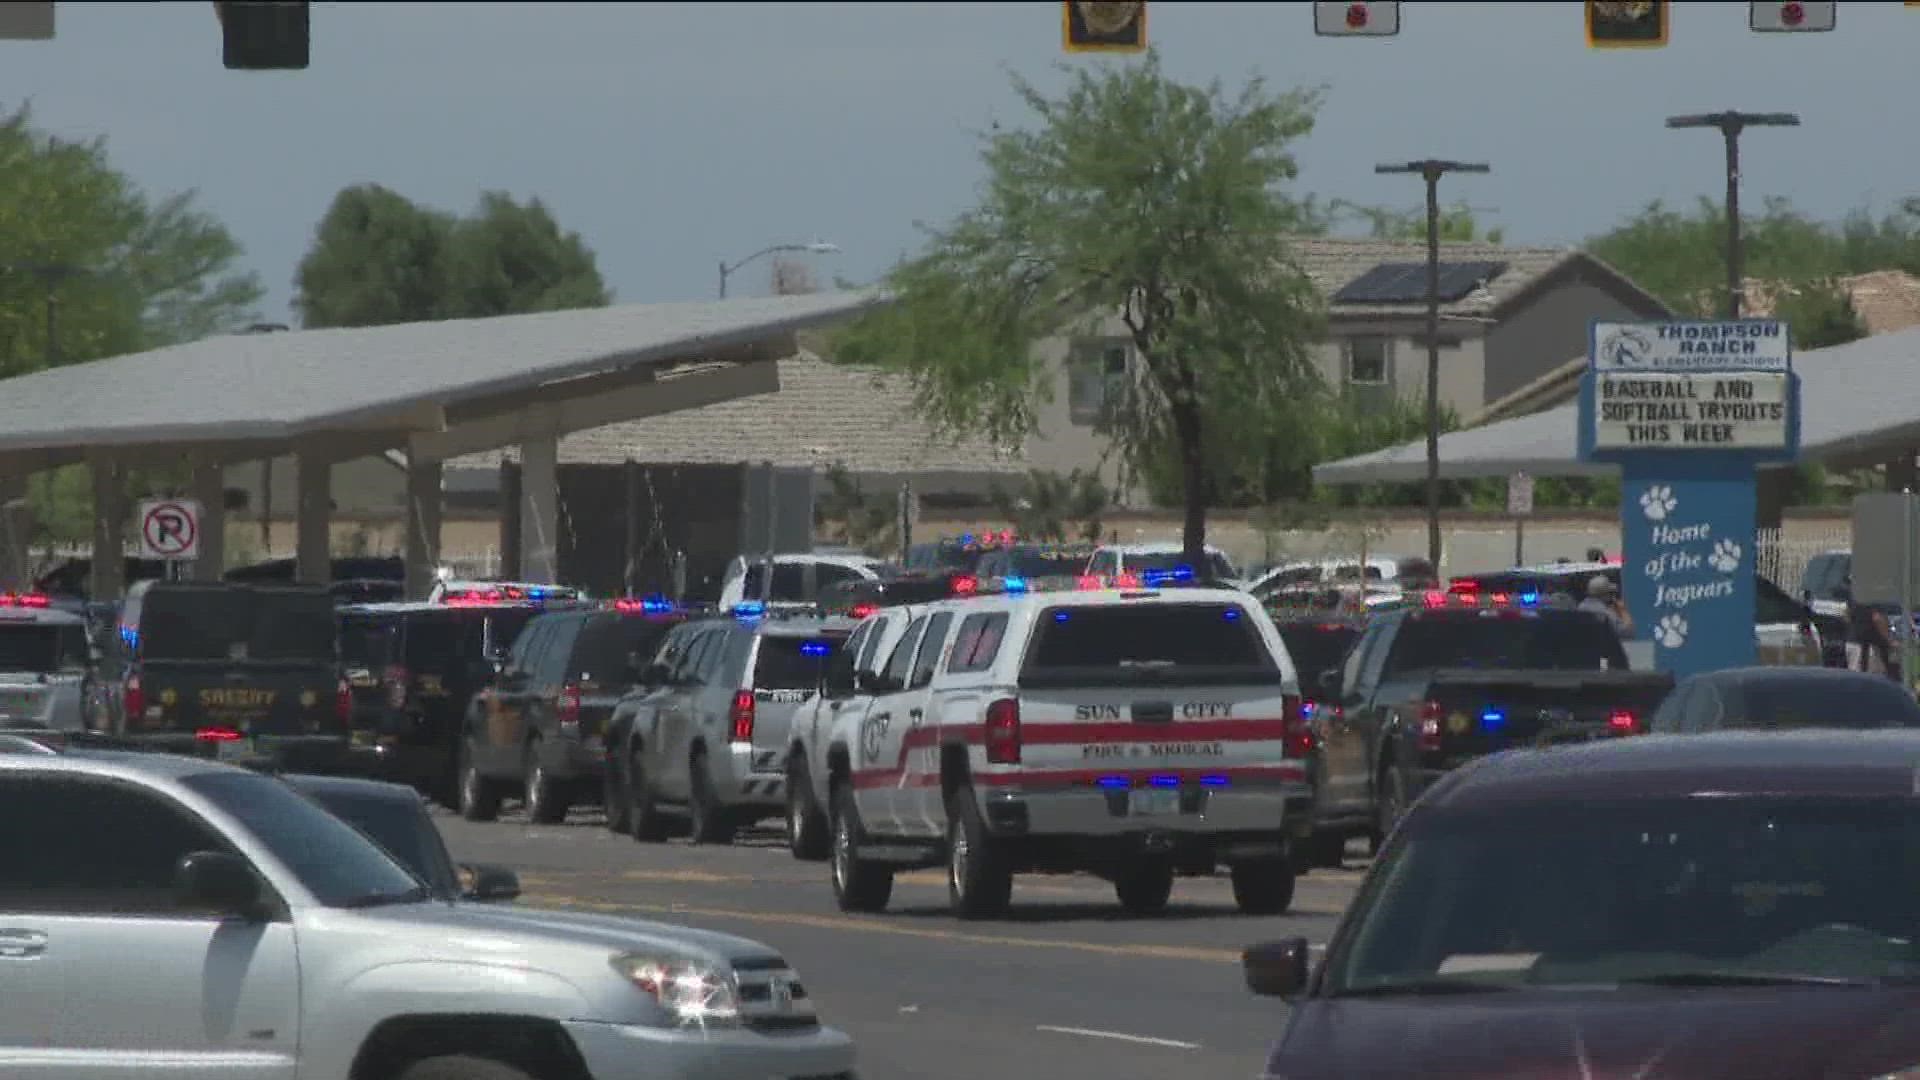 A man trying to enter an elementary school in El Mirage triggered a lockdown. Police say he is in custody now.